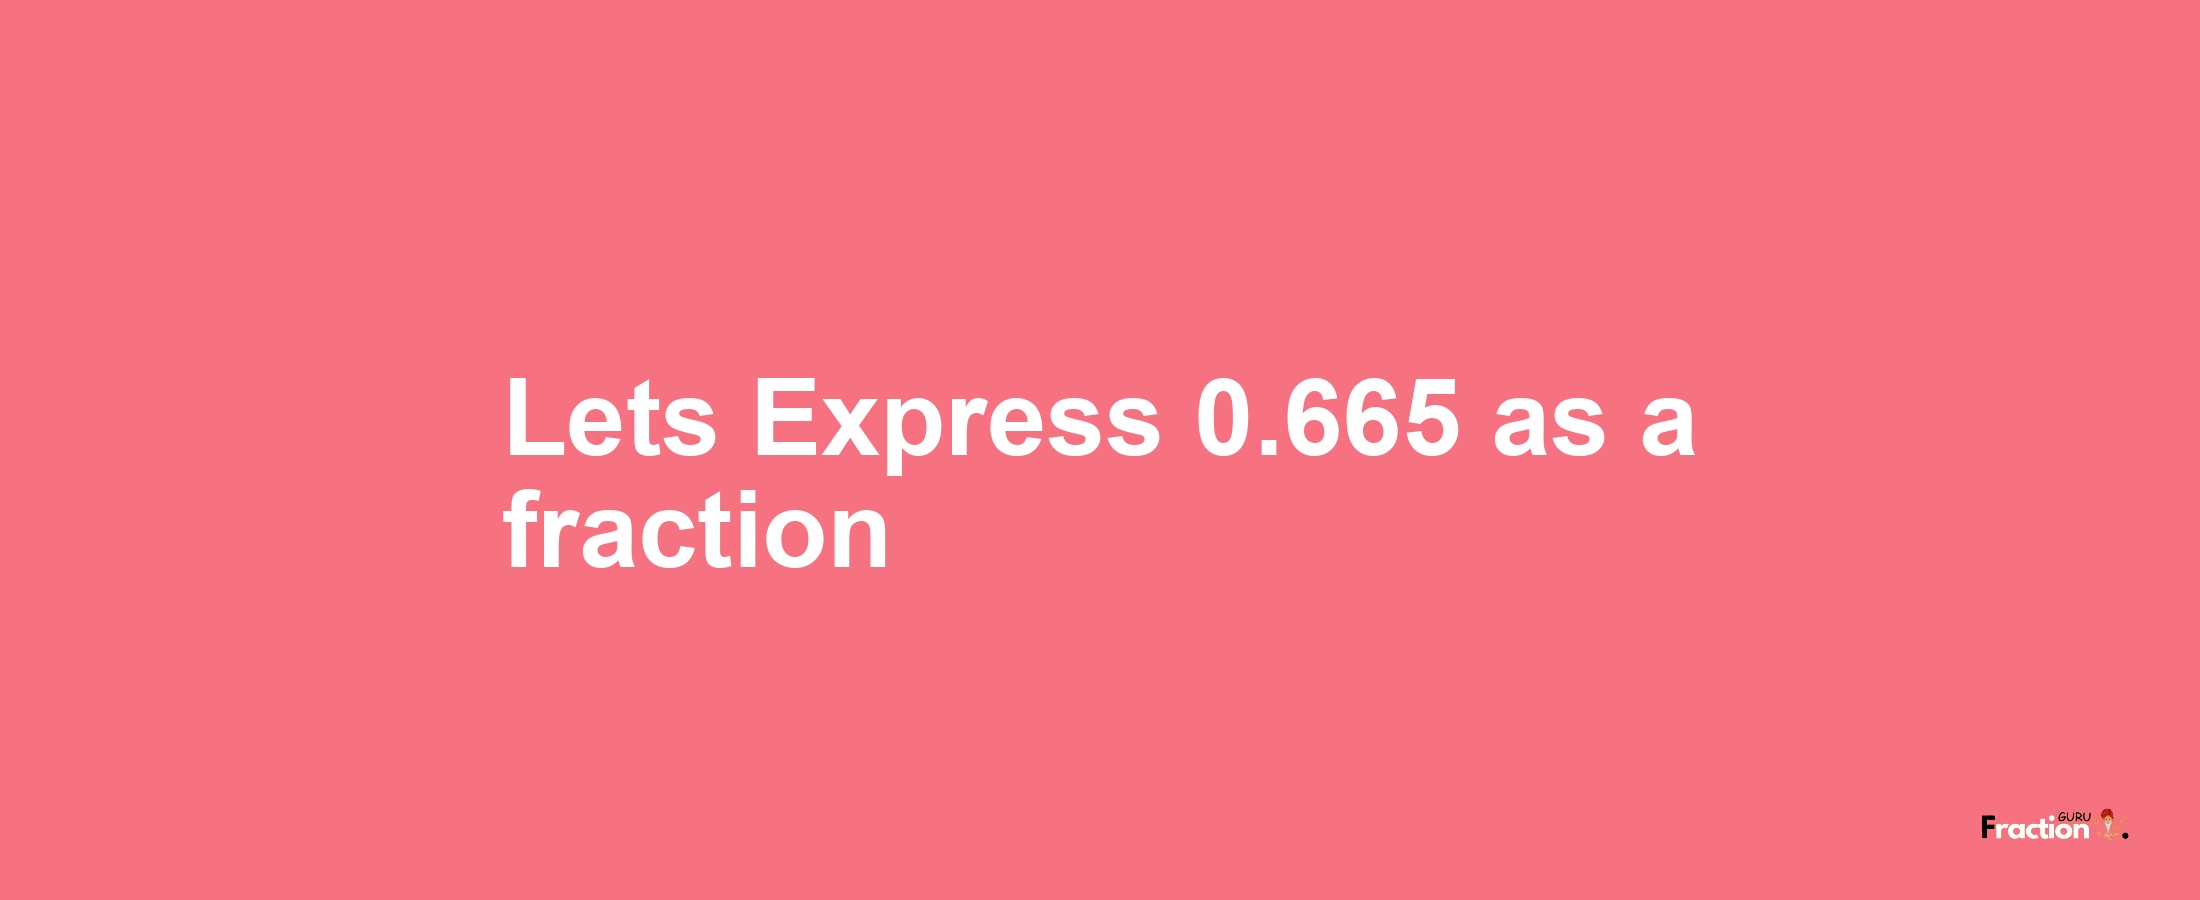 Lets Express 0.665 as afraction